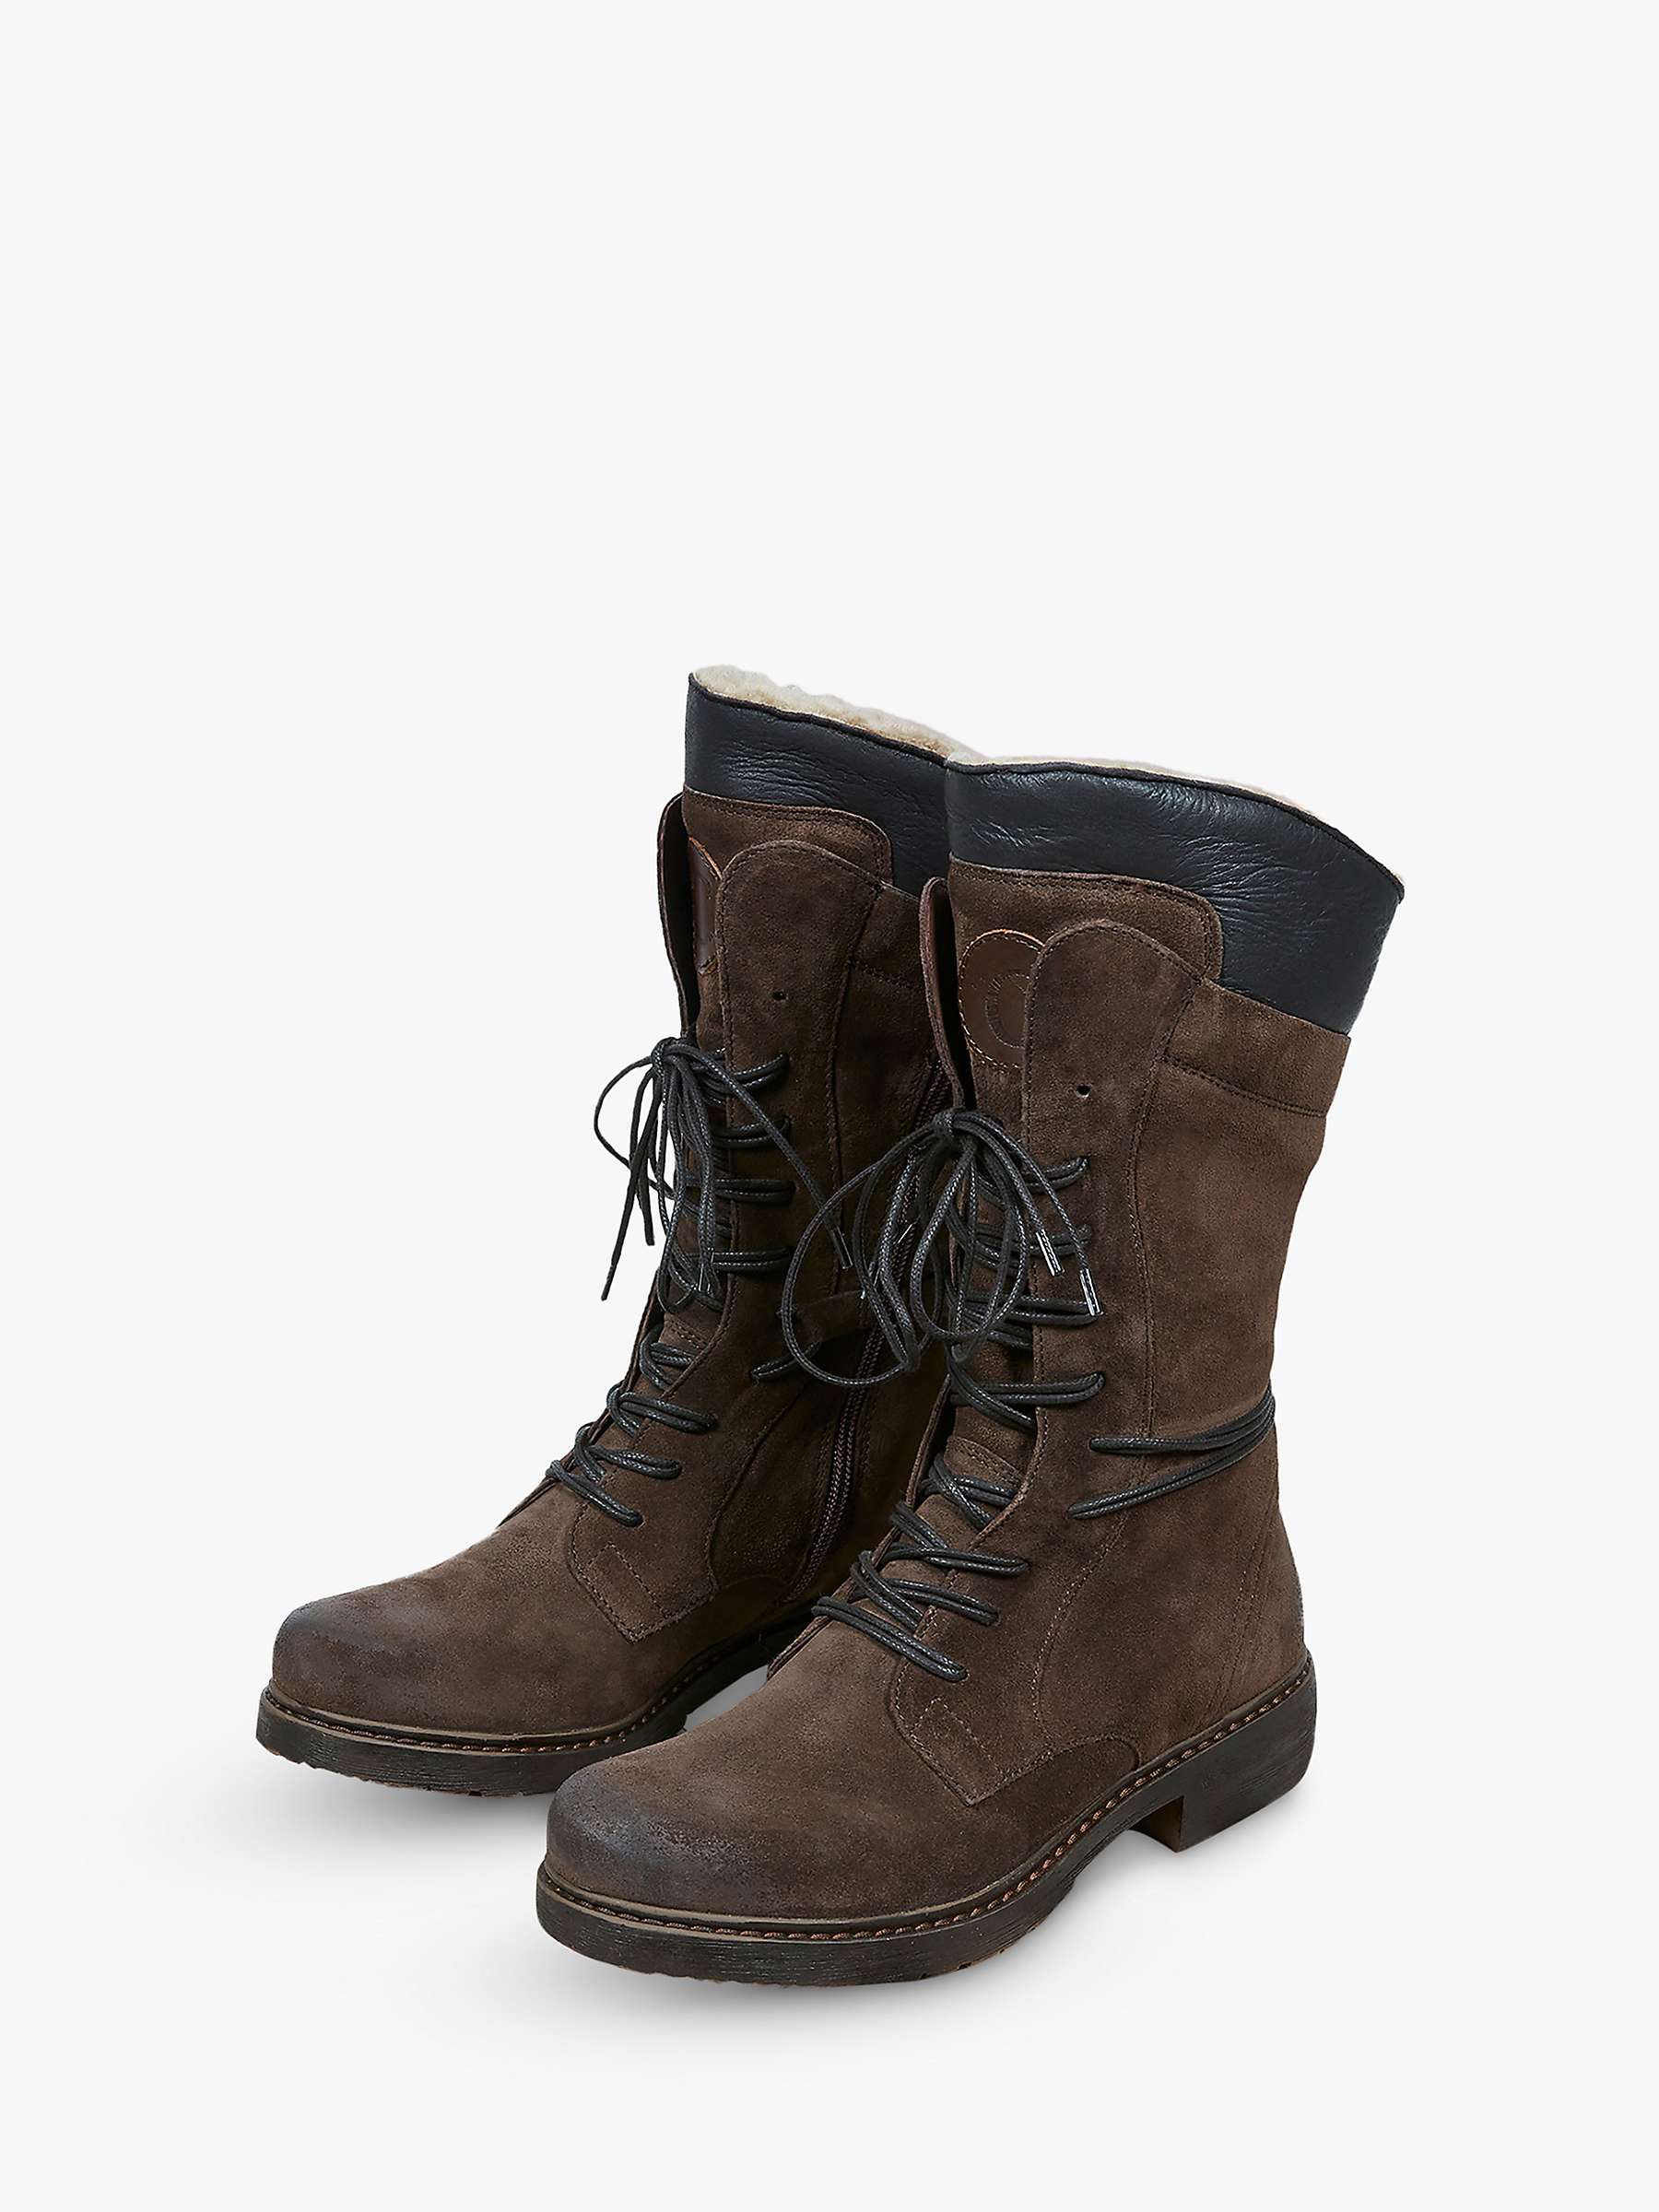 Buy Celtic & Co. Woodsman Suede and Sheepskin Boots, Brown Online at johnlewis.com